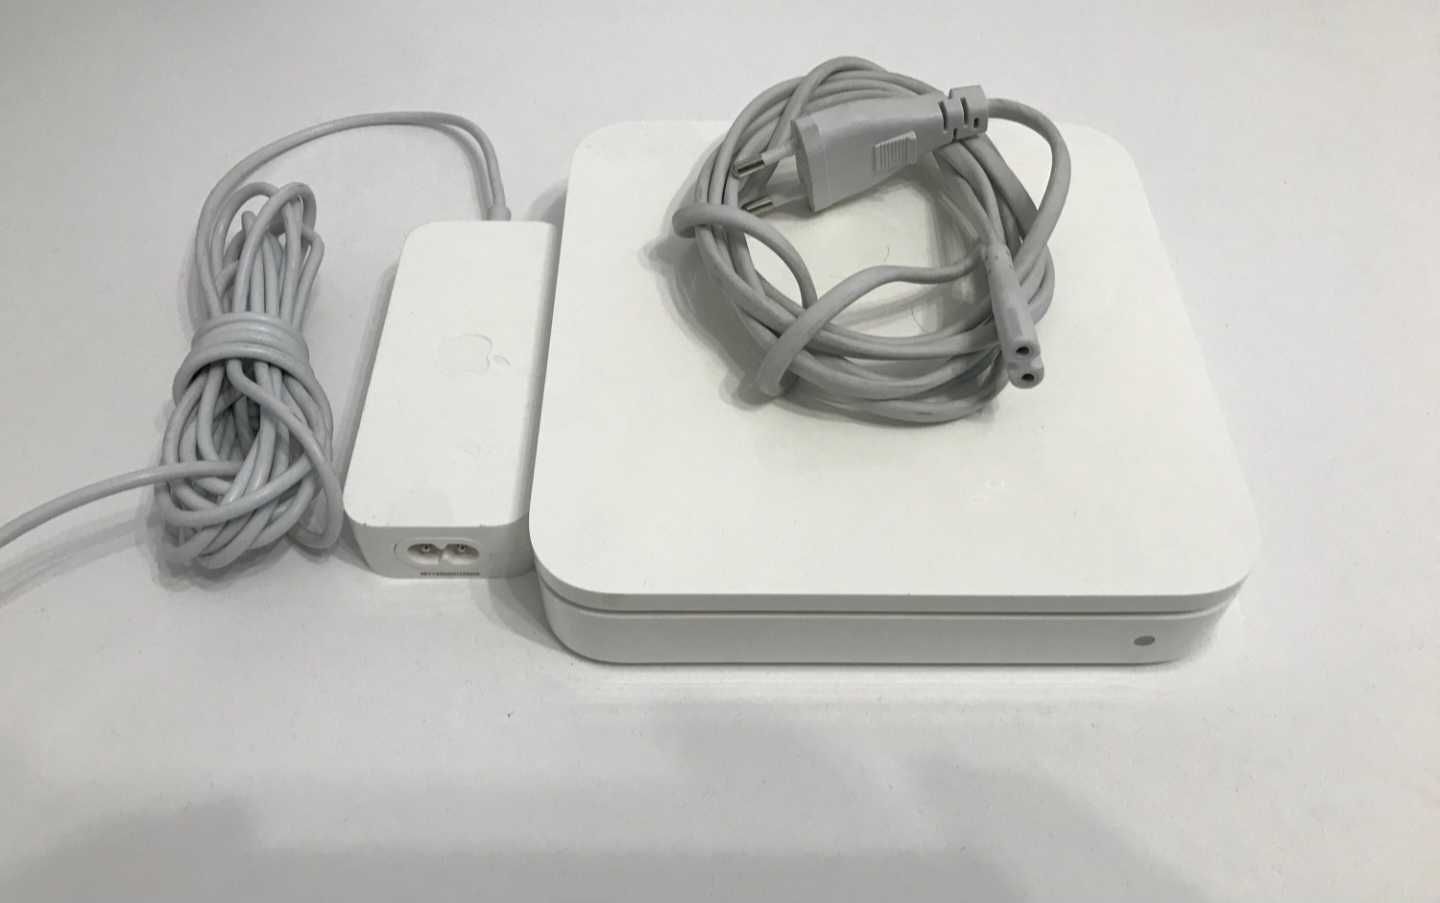 Router Apple A1143